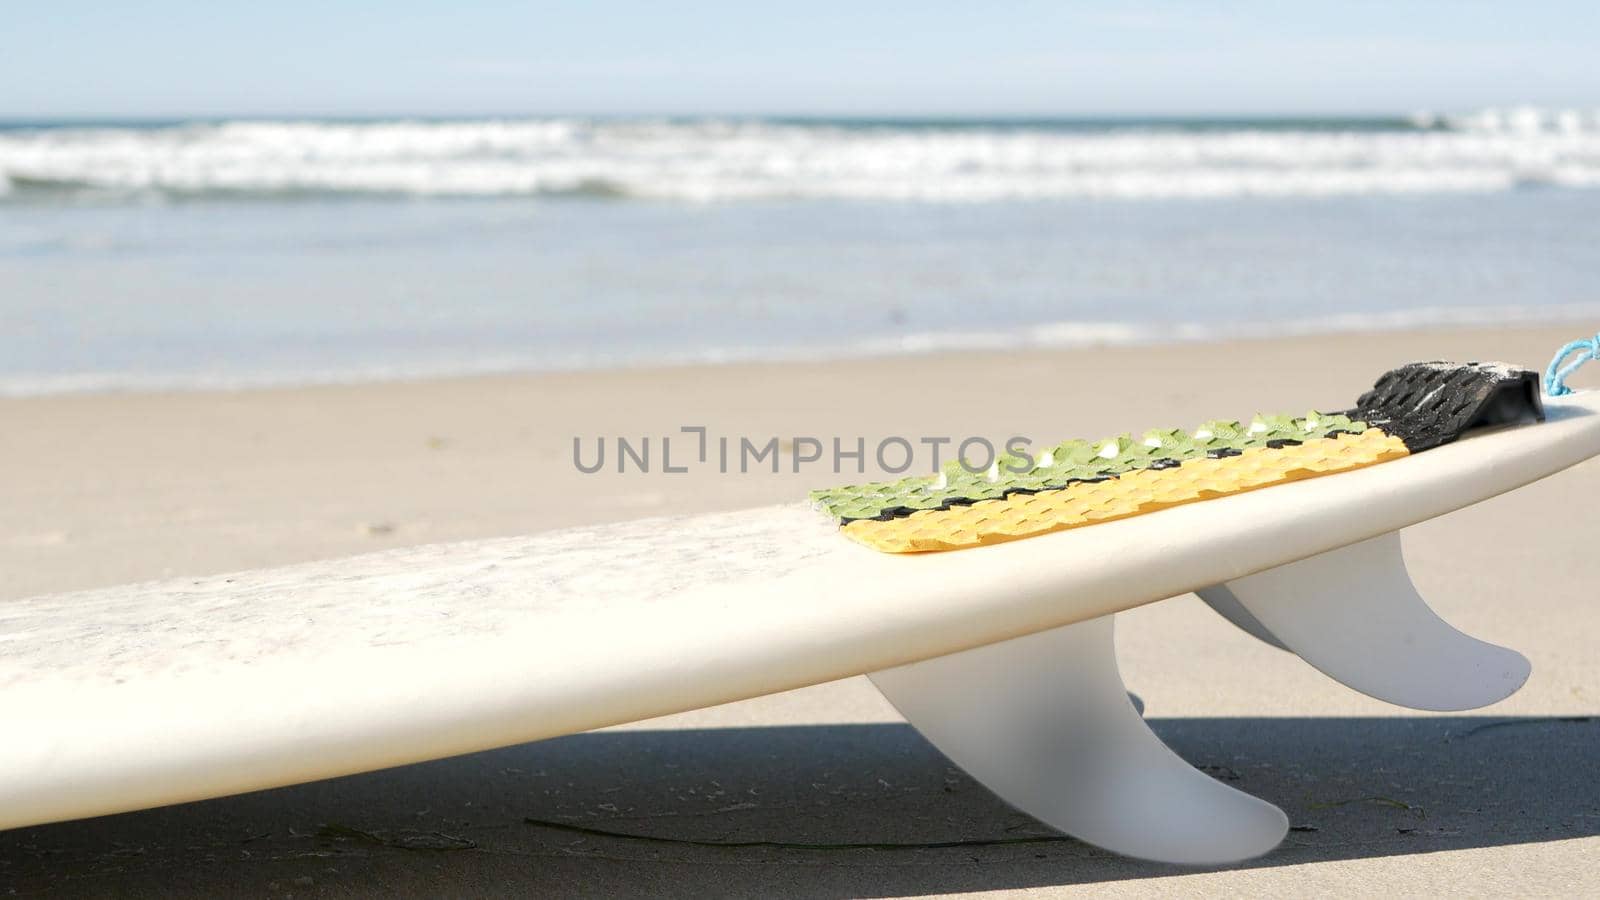 Surfboard for surfing lying on beach sand, California coast, USA. Ocean waves and white surf board or paddleboard. Longboard or sup for watersport recreation by sea water. Seamless looped cinemagraph.